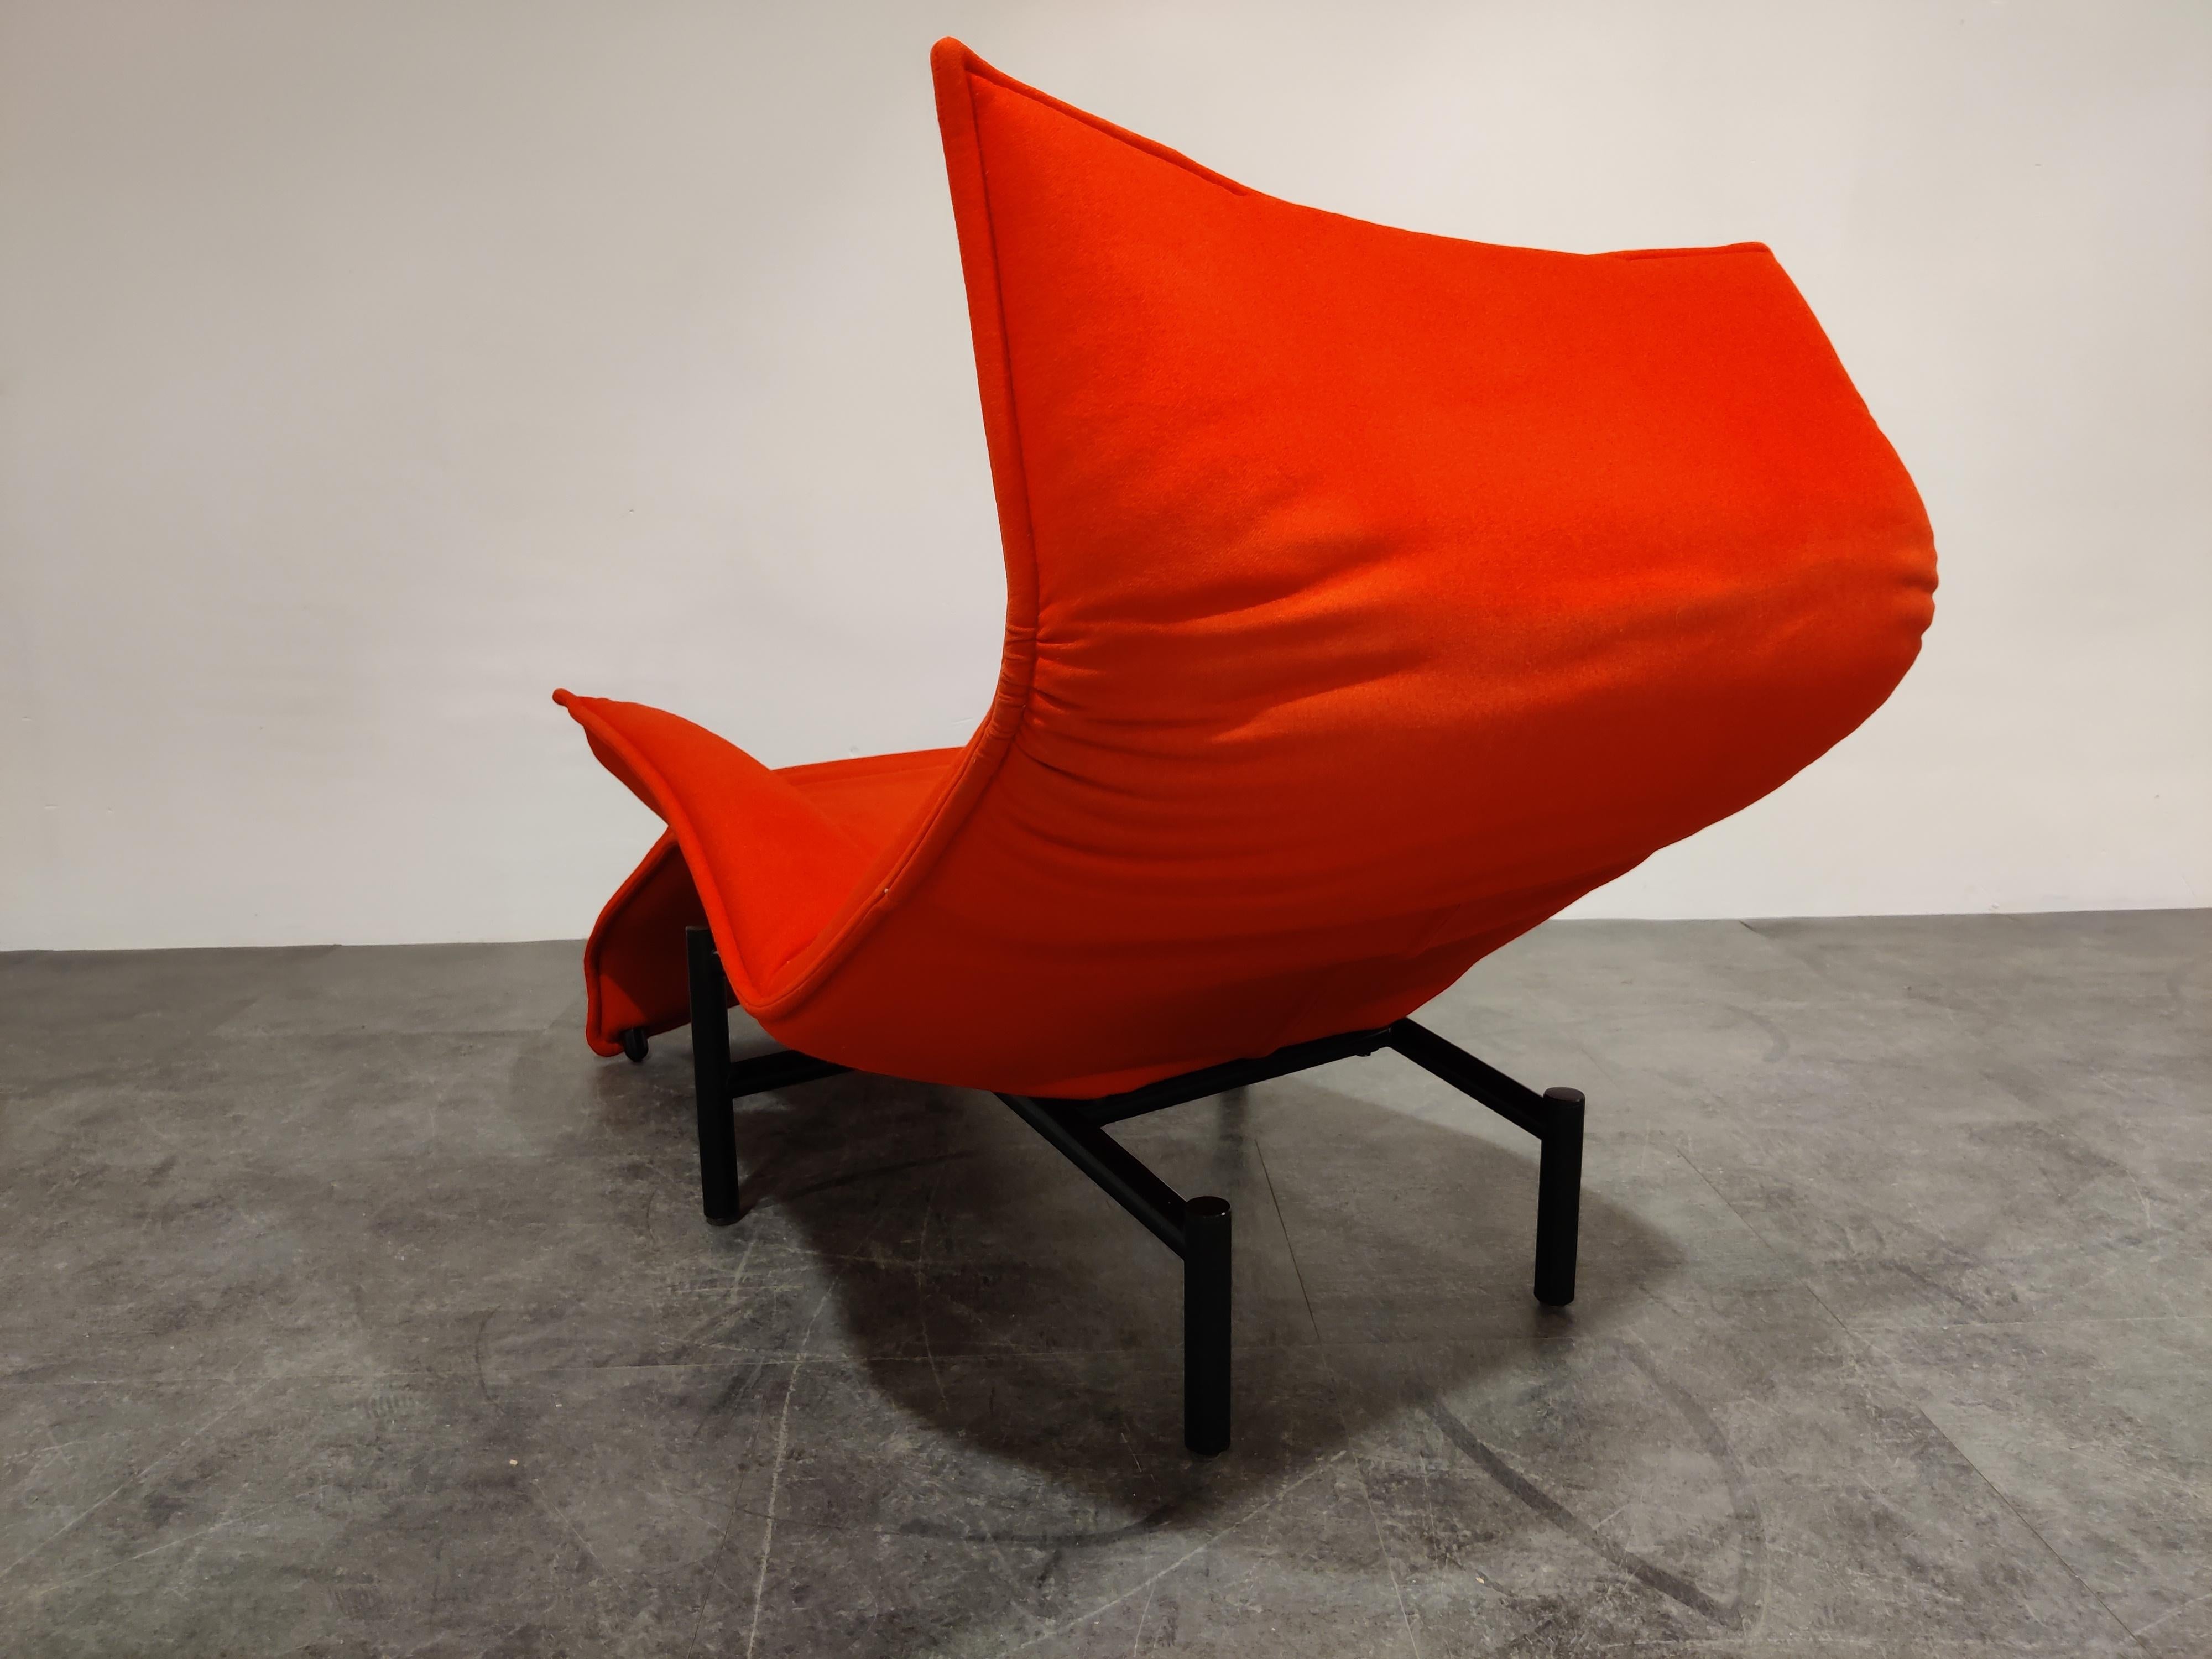 Vintage red fabric veranda lounge chair designed by Vico Magistretti for Cassina.

Beautiful lively red color and black lacquered metal frame.

The chair is adjustable in various way and has an ergonomic and timeless deisgn.

Magistretti's